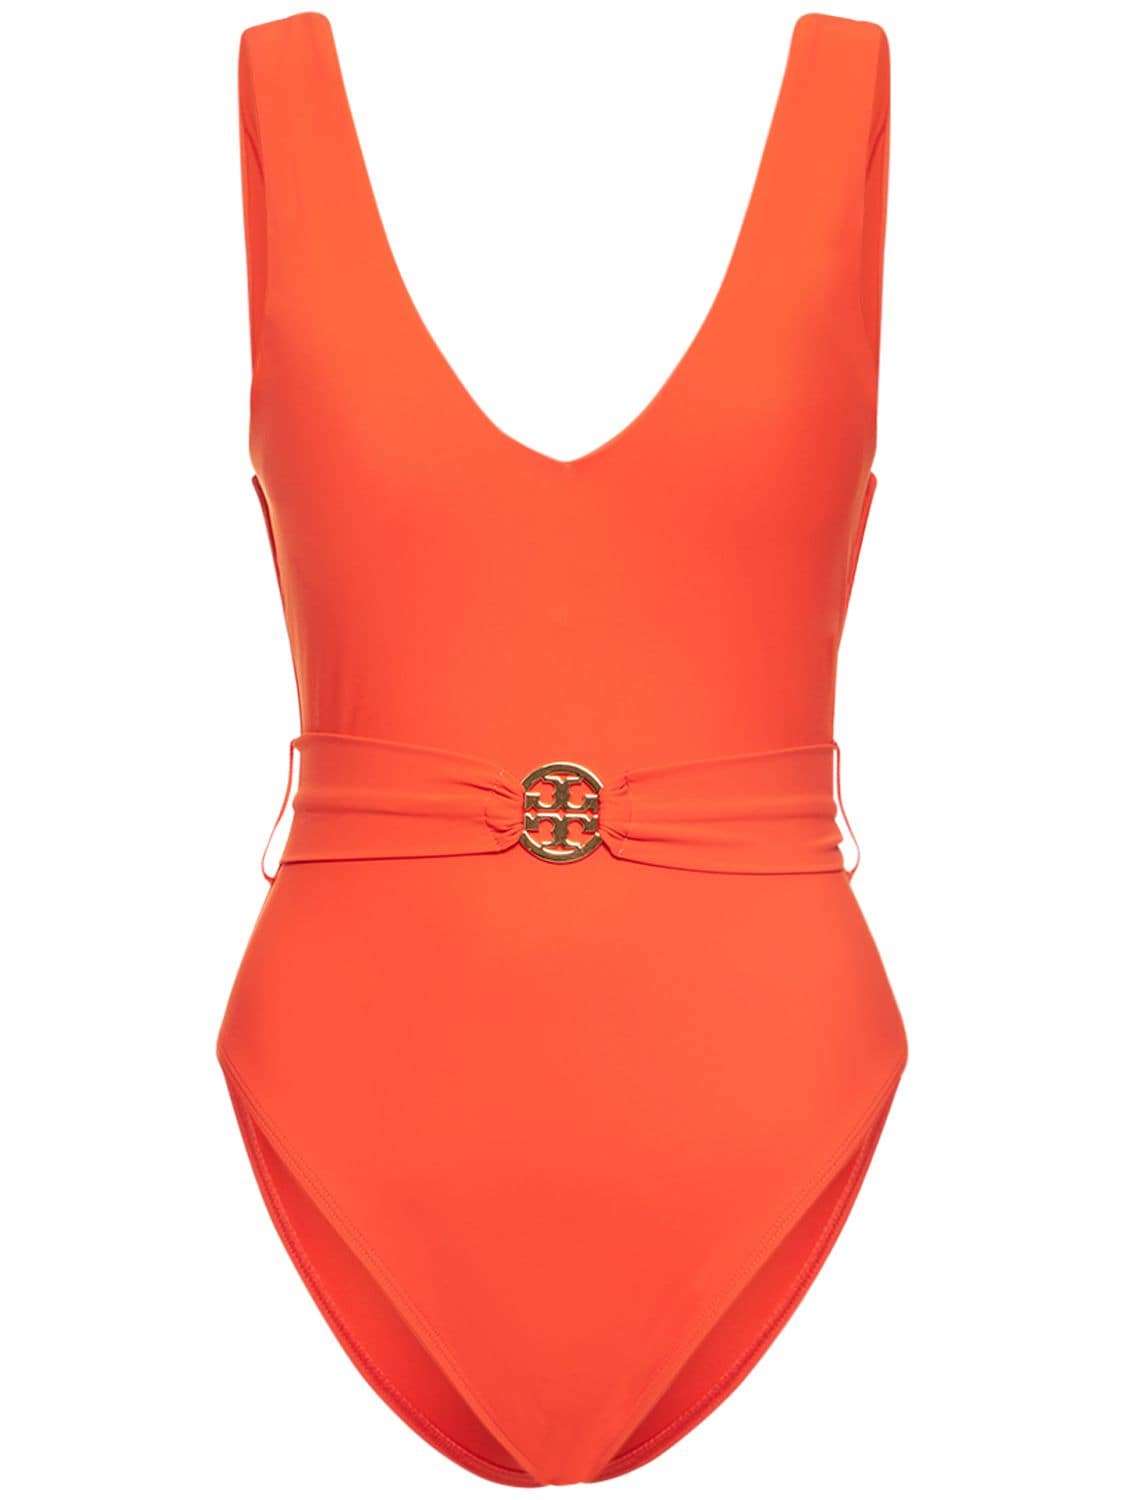 TORY BURCH MILLER PLUNGE ONEPIECE SWIMSUIT